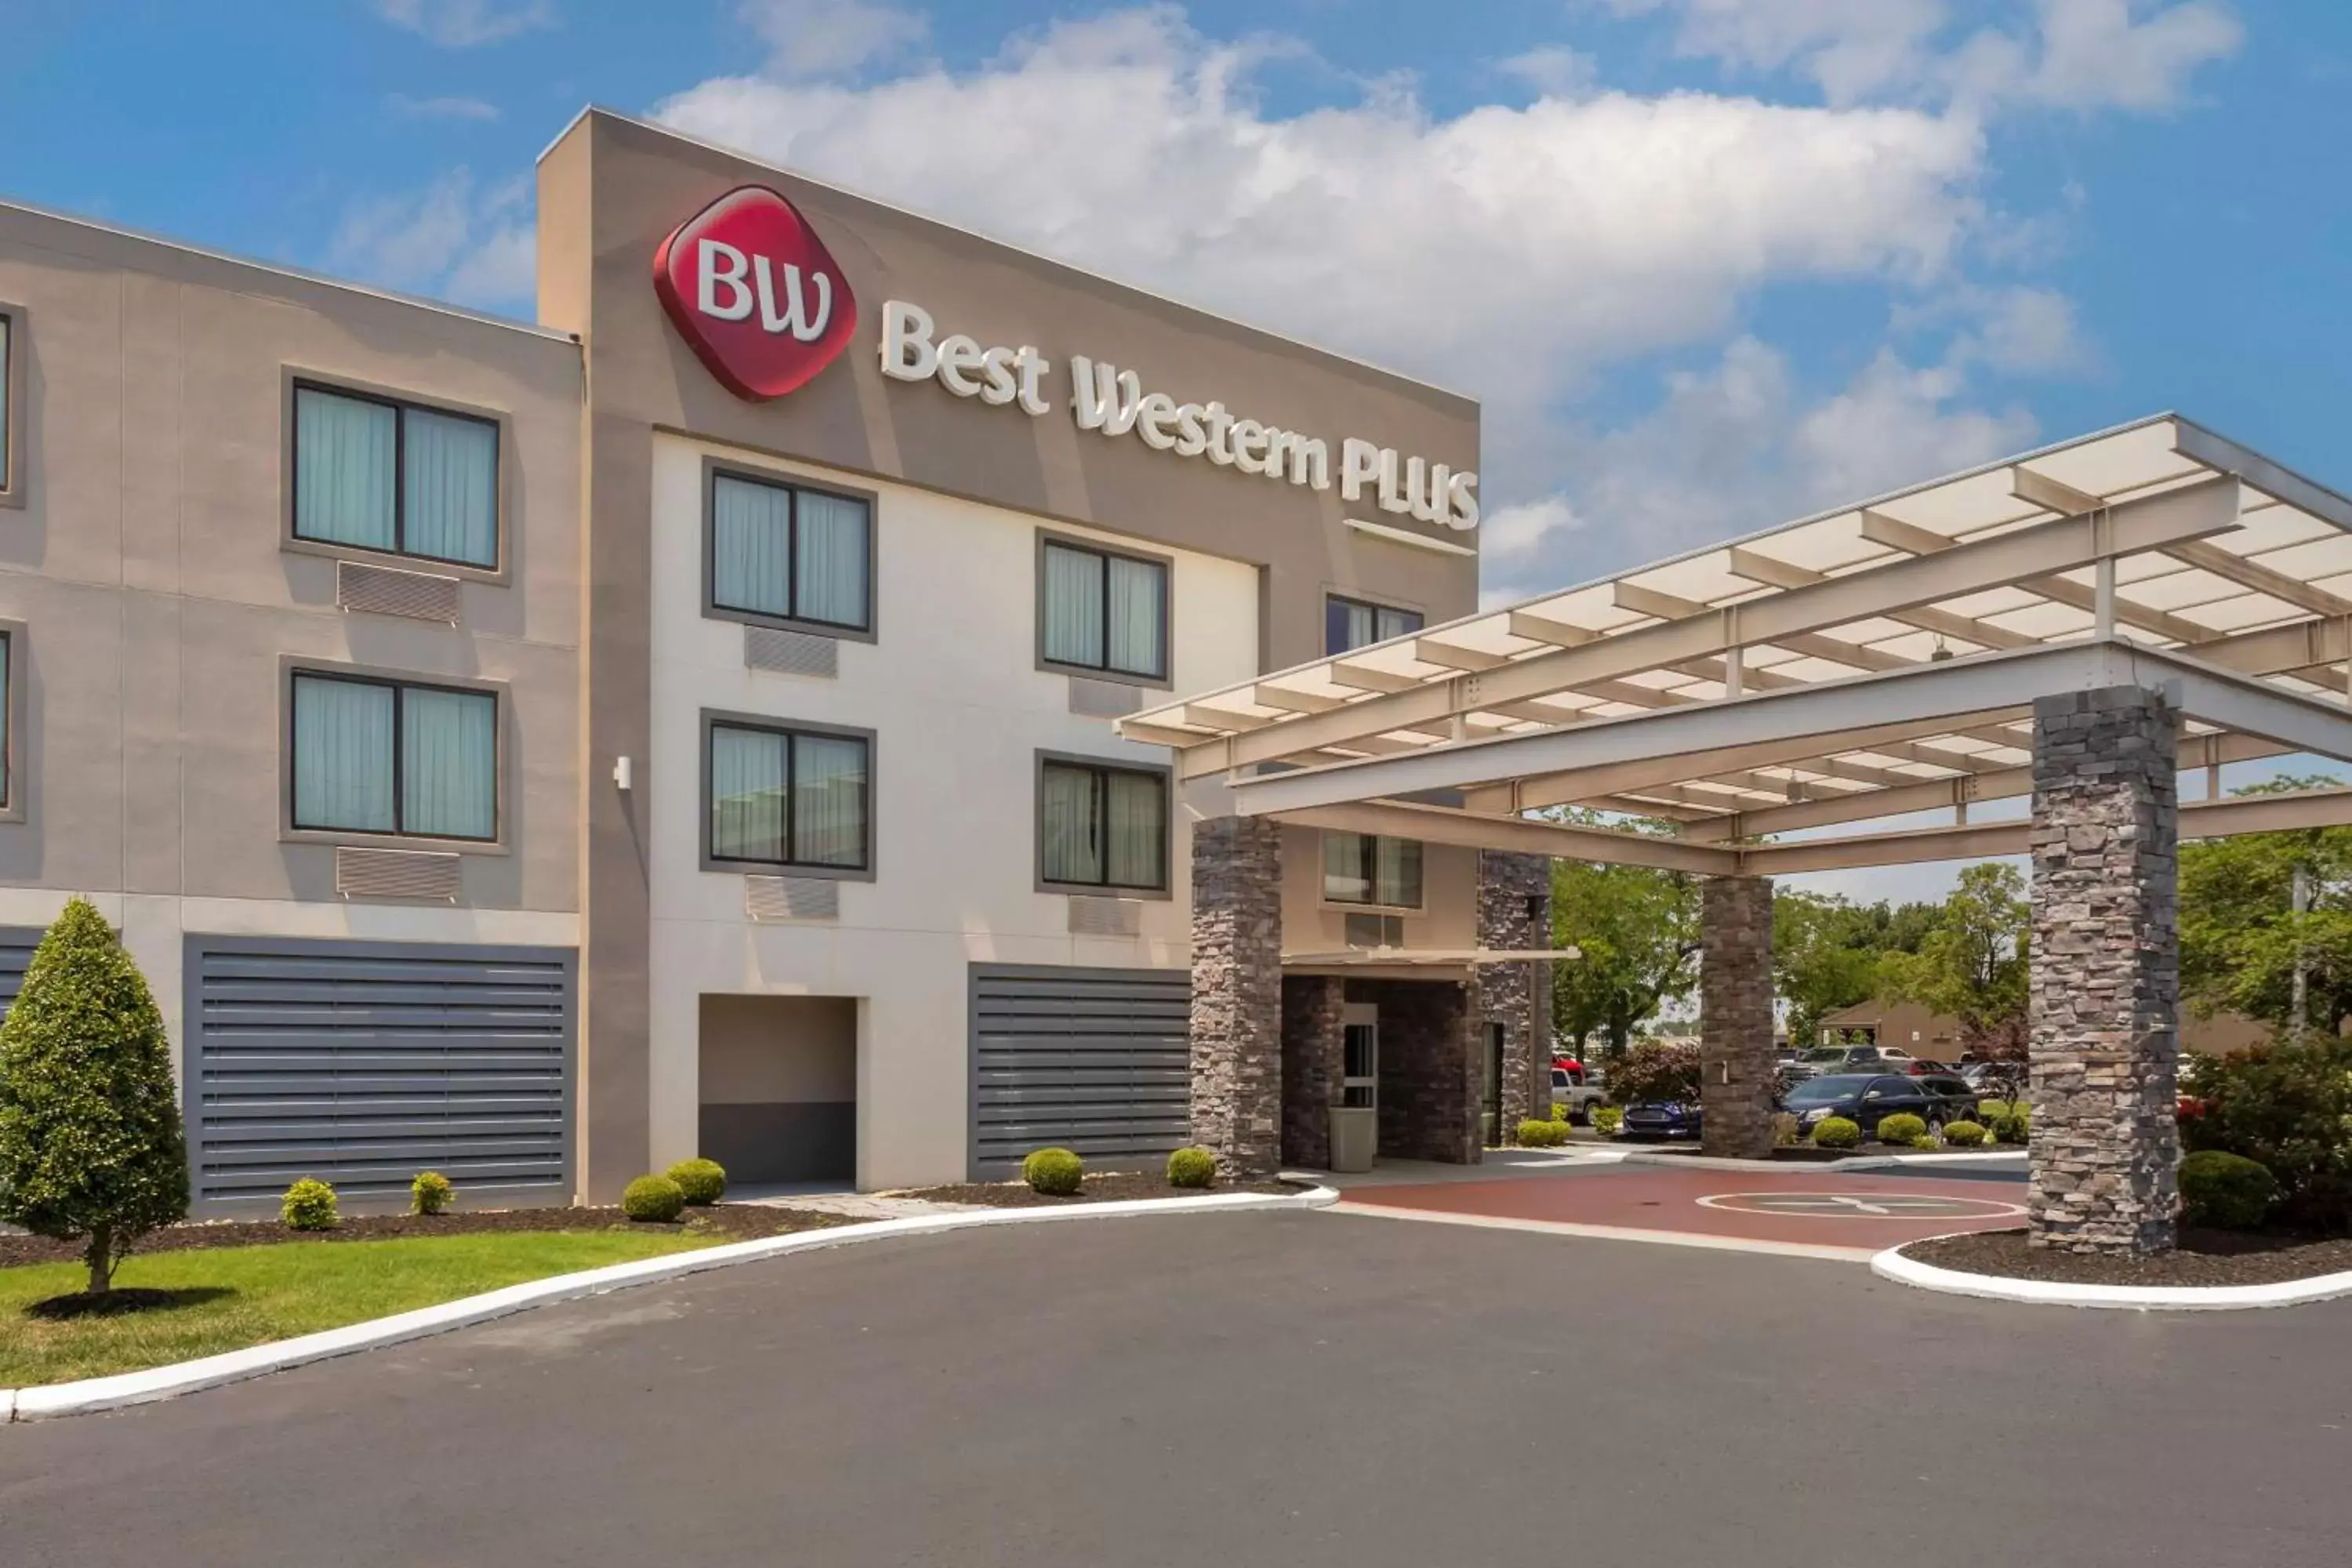 Property Building in Best Western Plus Bowling Green